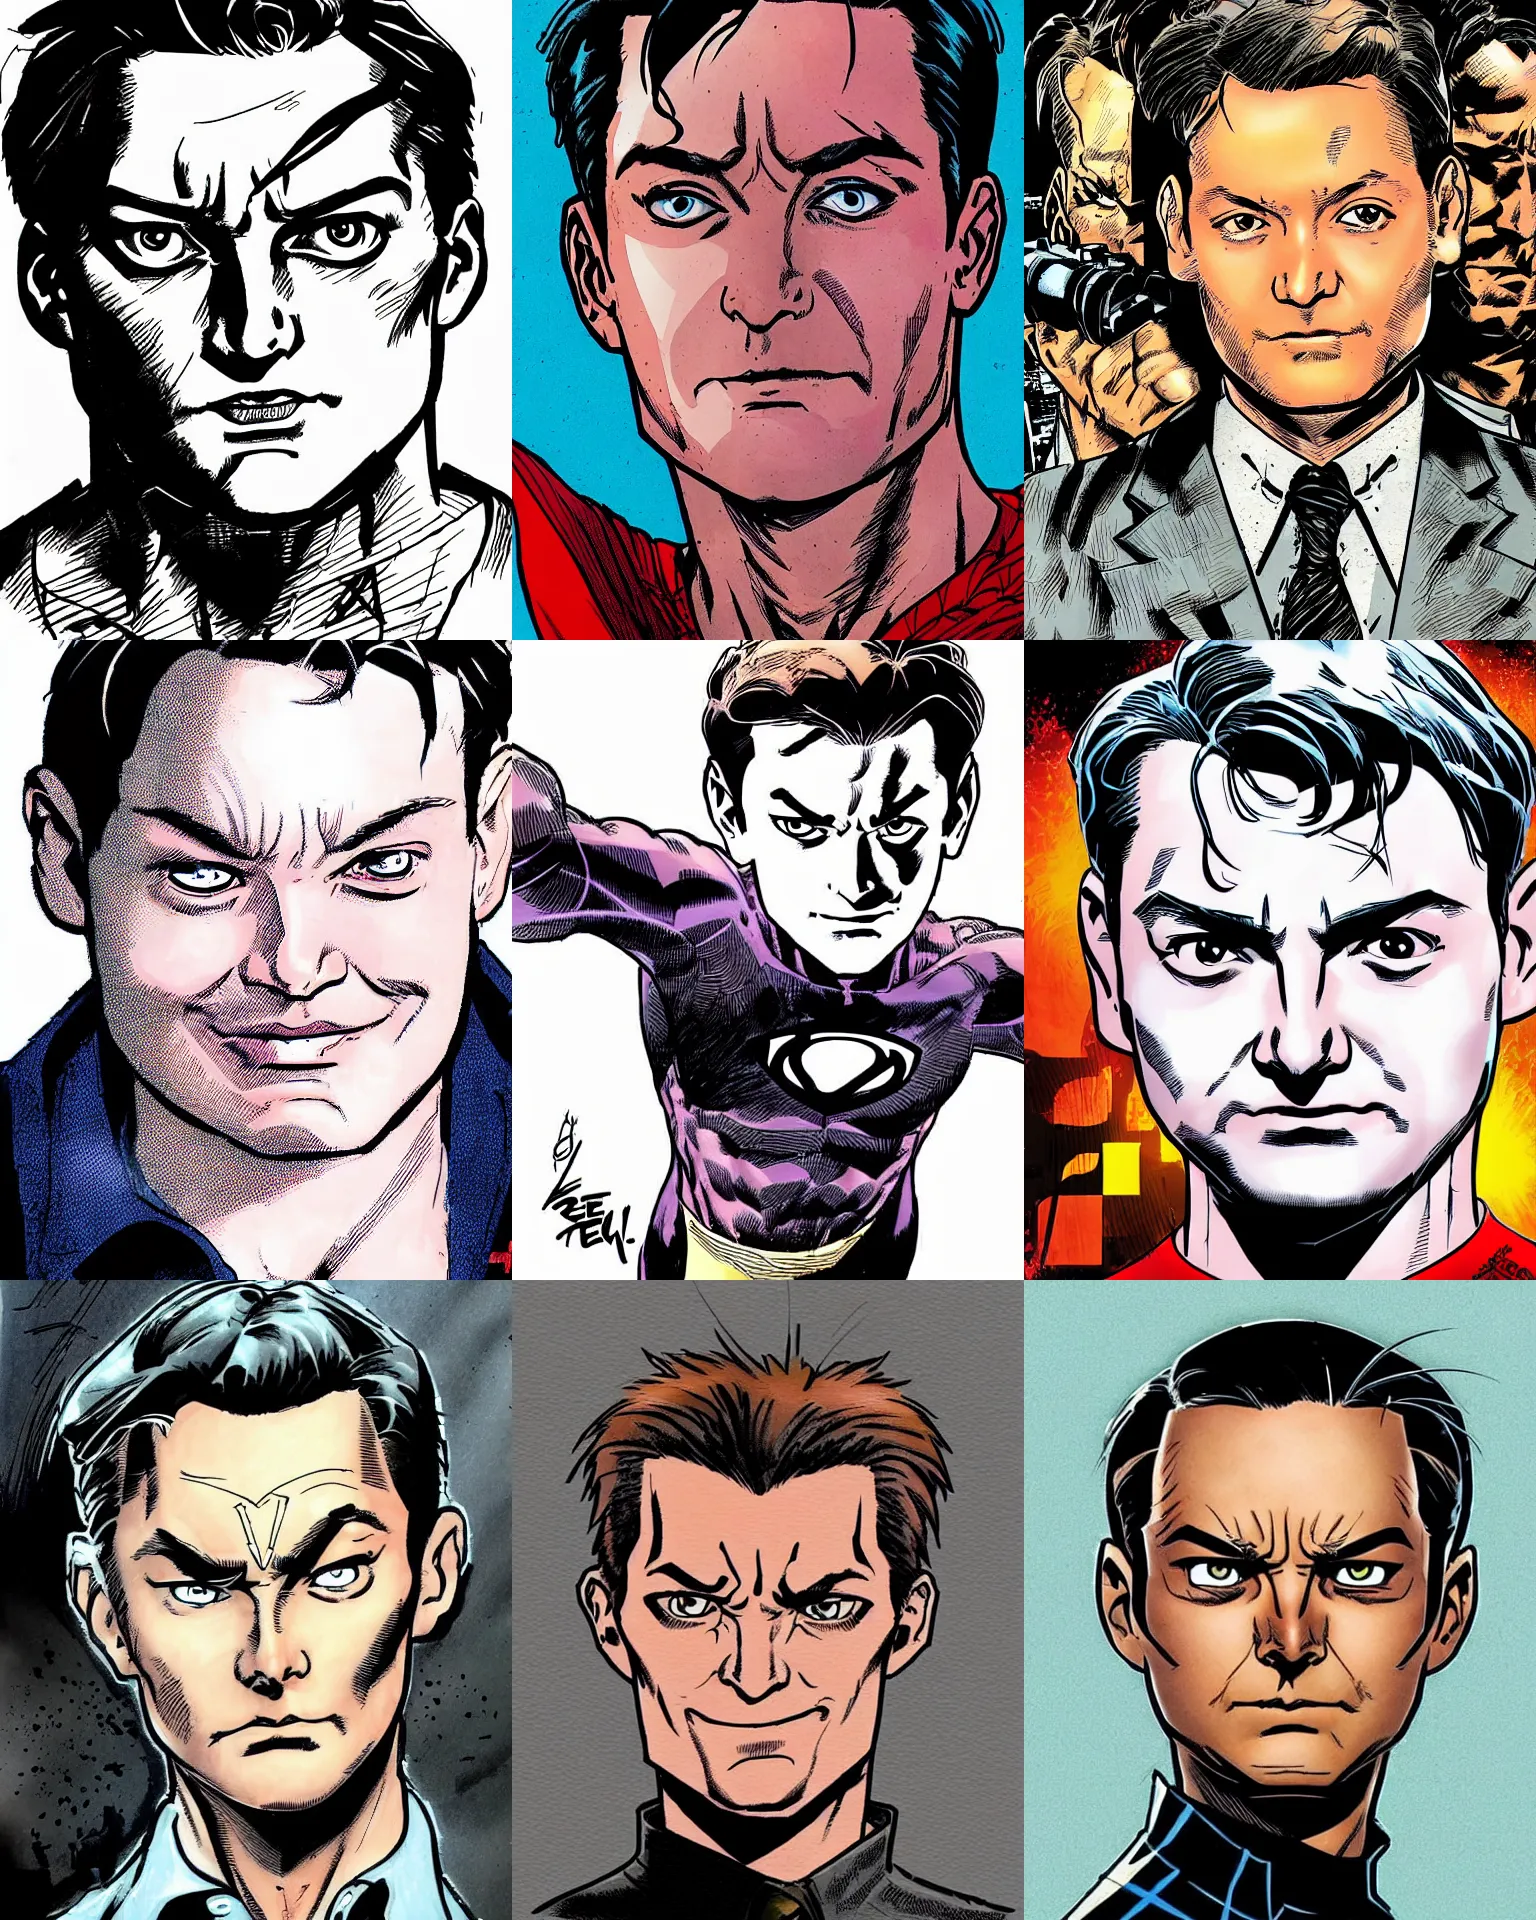 Prompt: real tobey maguire!!!jim lee!!! flat ink colored sketch by jim lee face close up headshot of real! tobey maguire!! in the style of jim lee, x-men superhero comic book character by jim lee